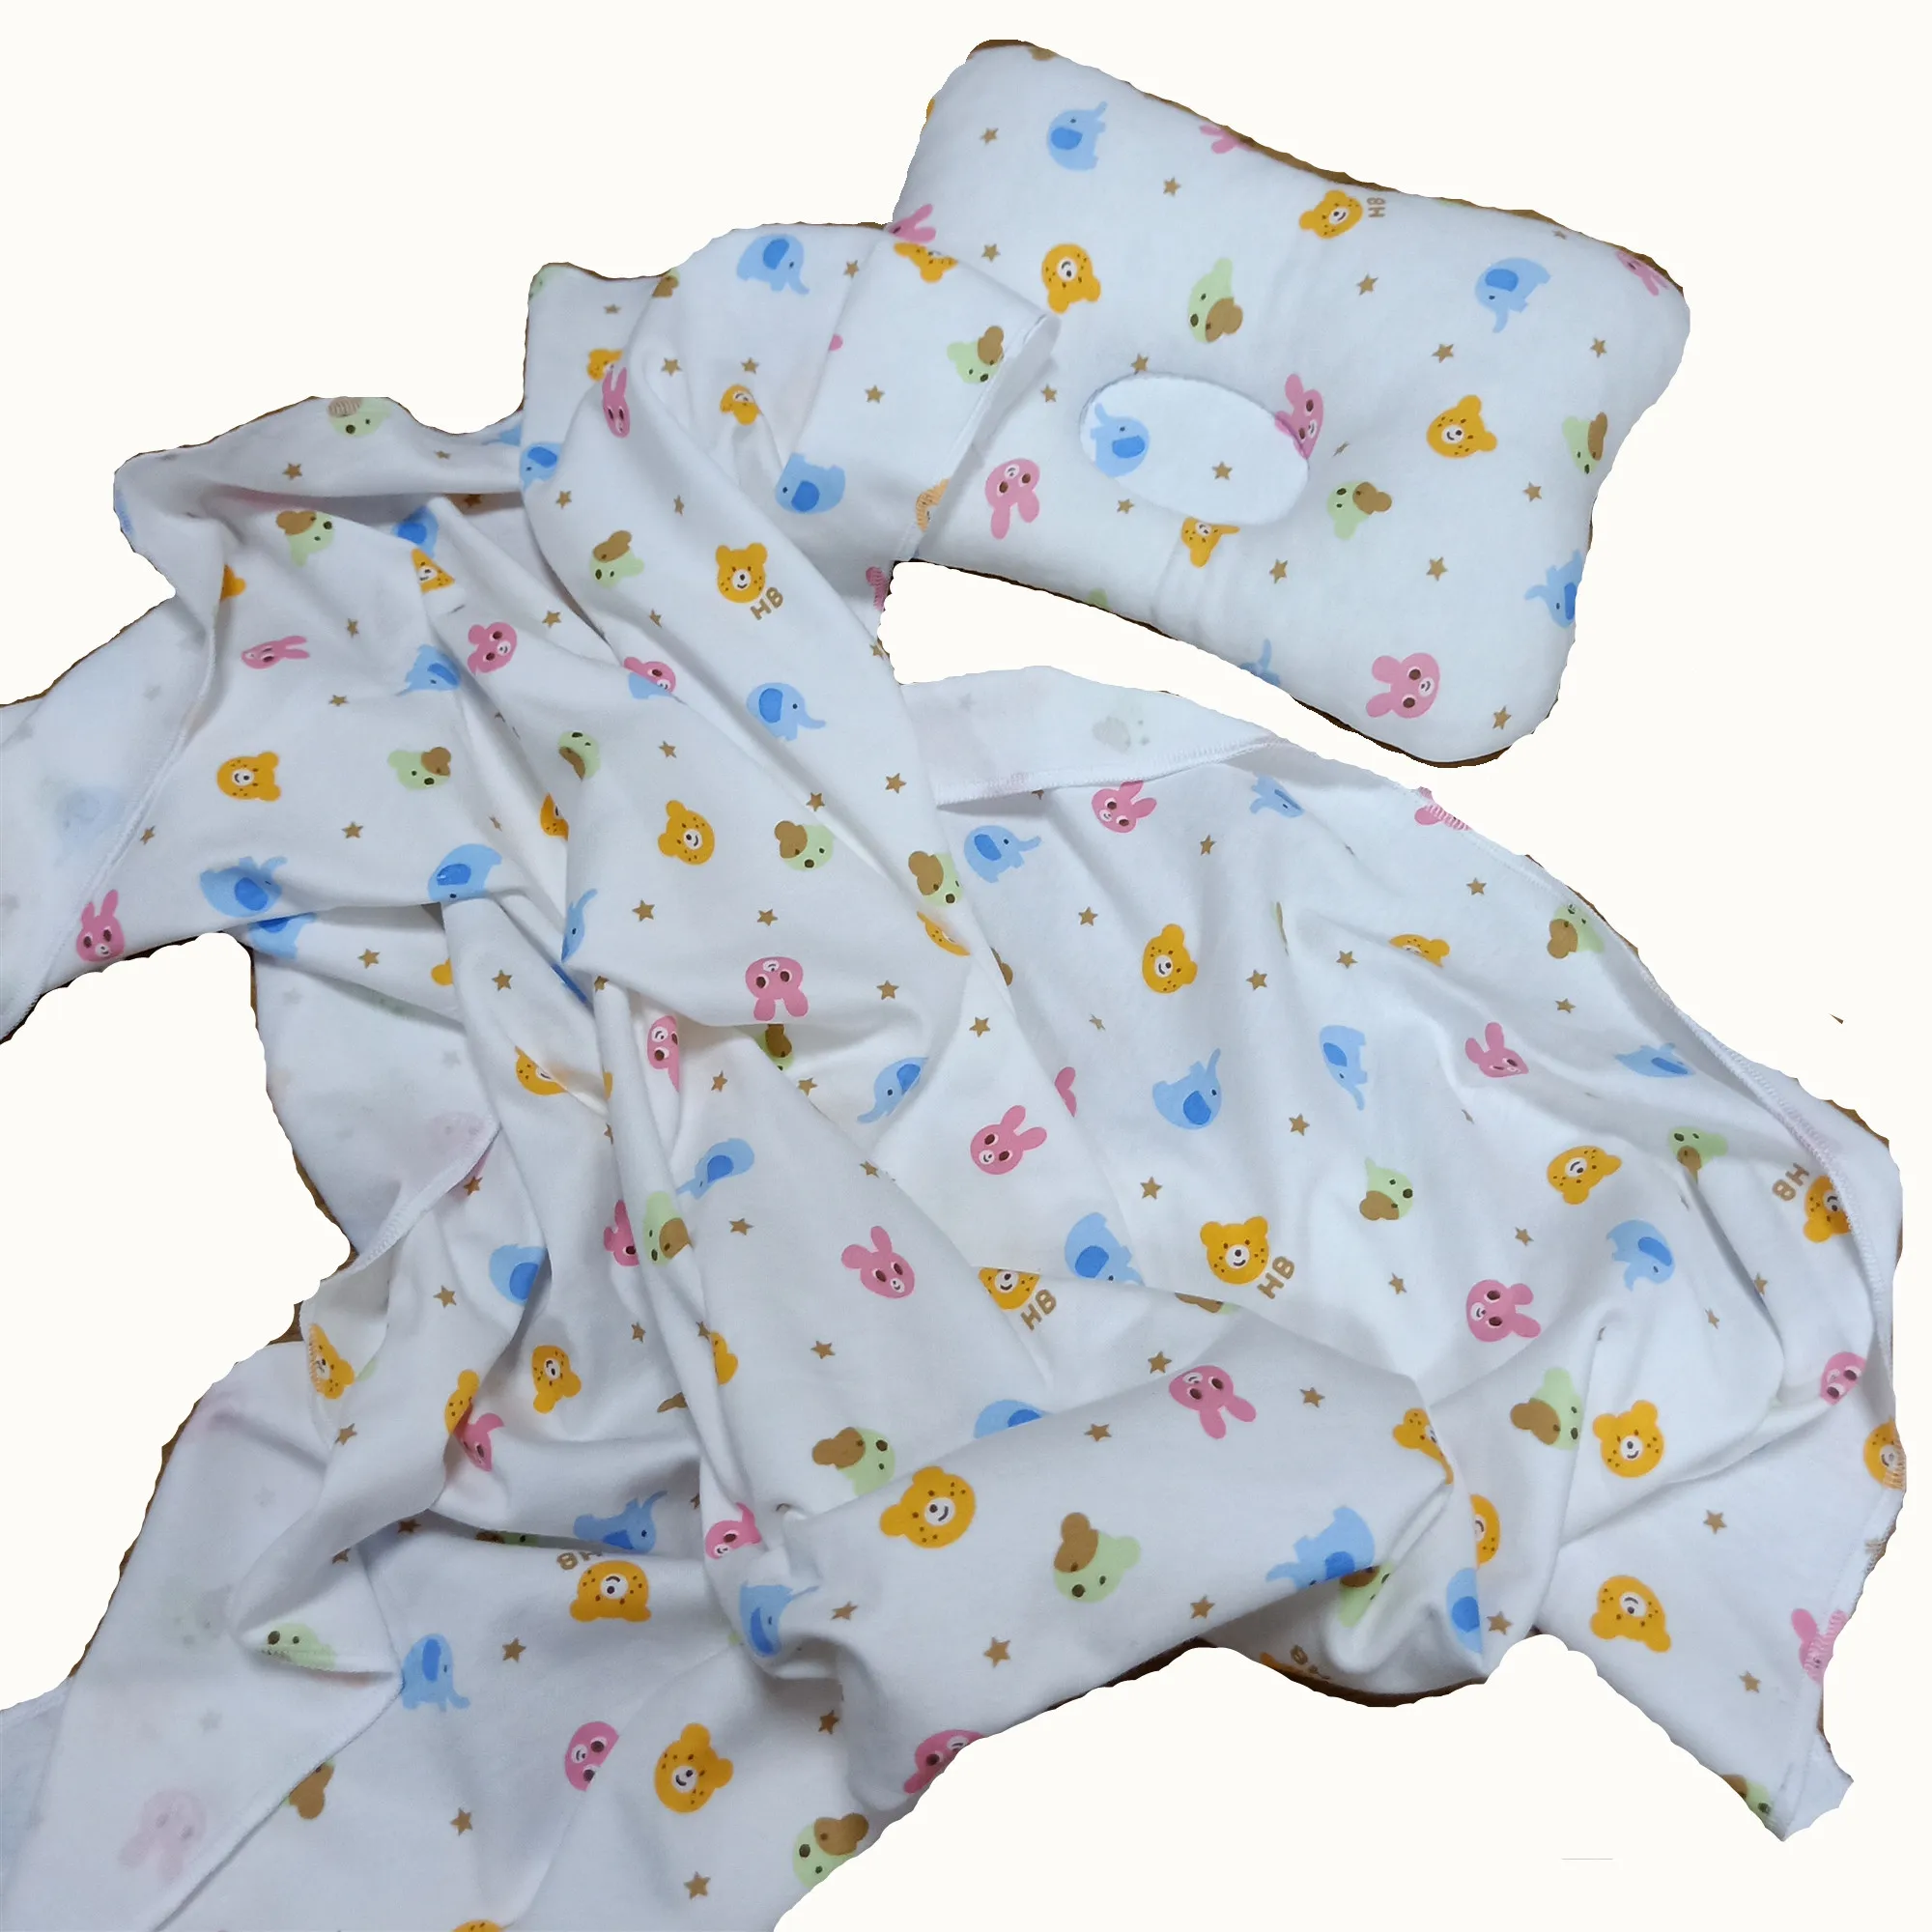 3D Air Mesh Baby Pillow and Baby Nursery Blanket Combined Set 